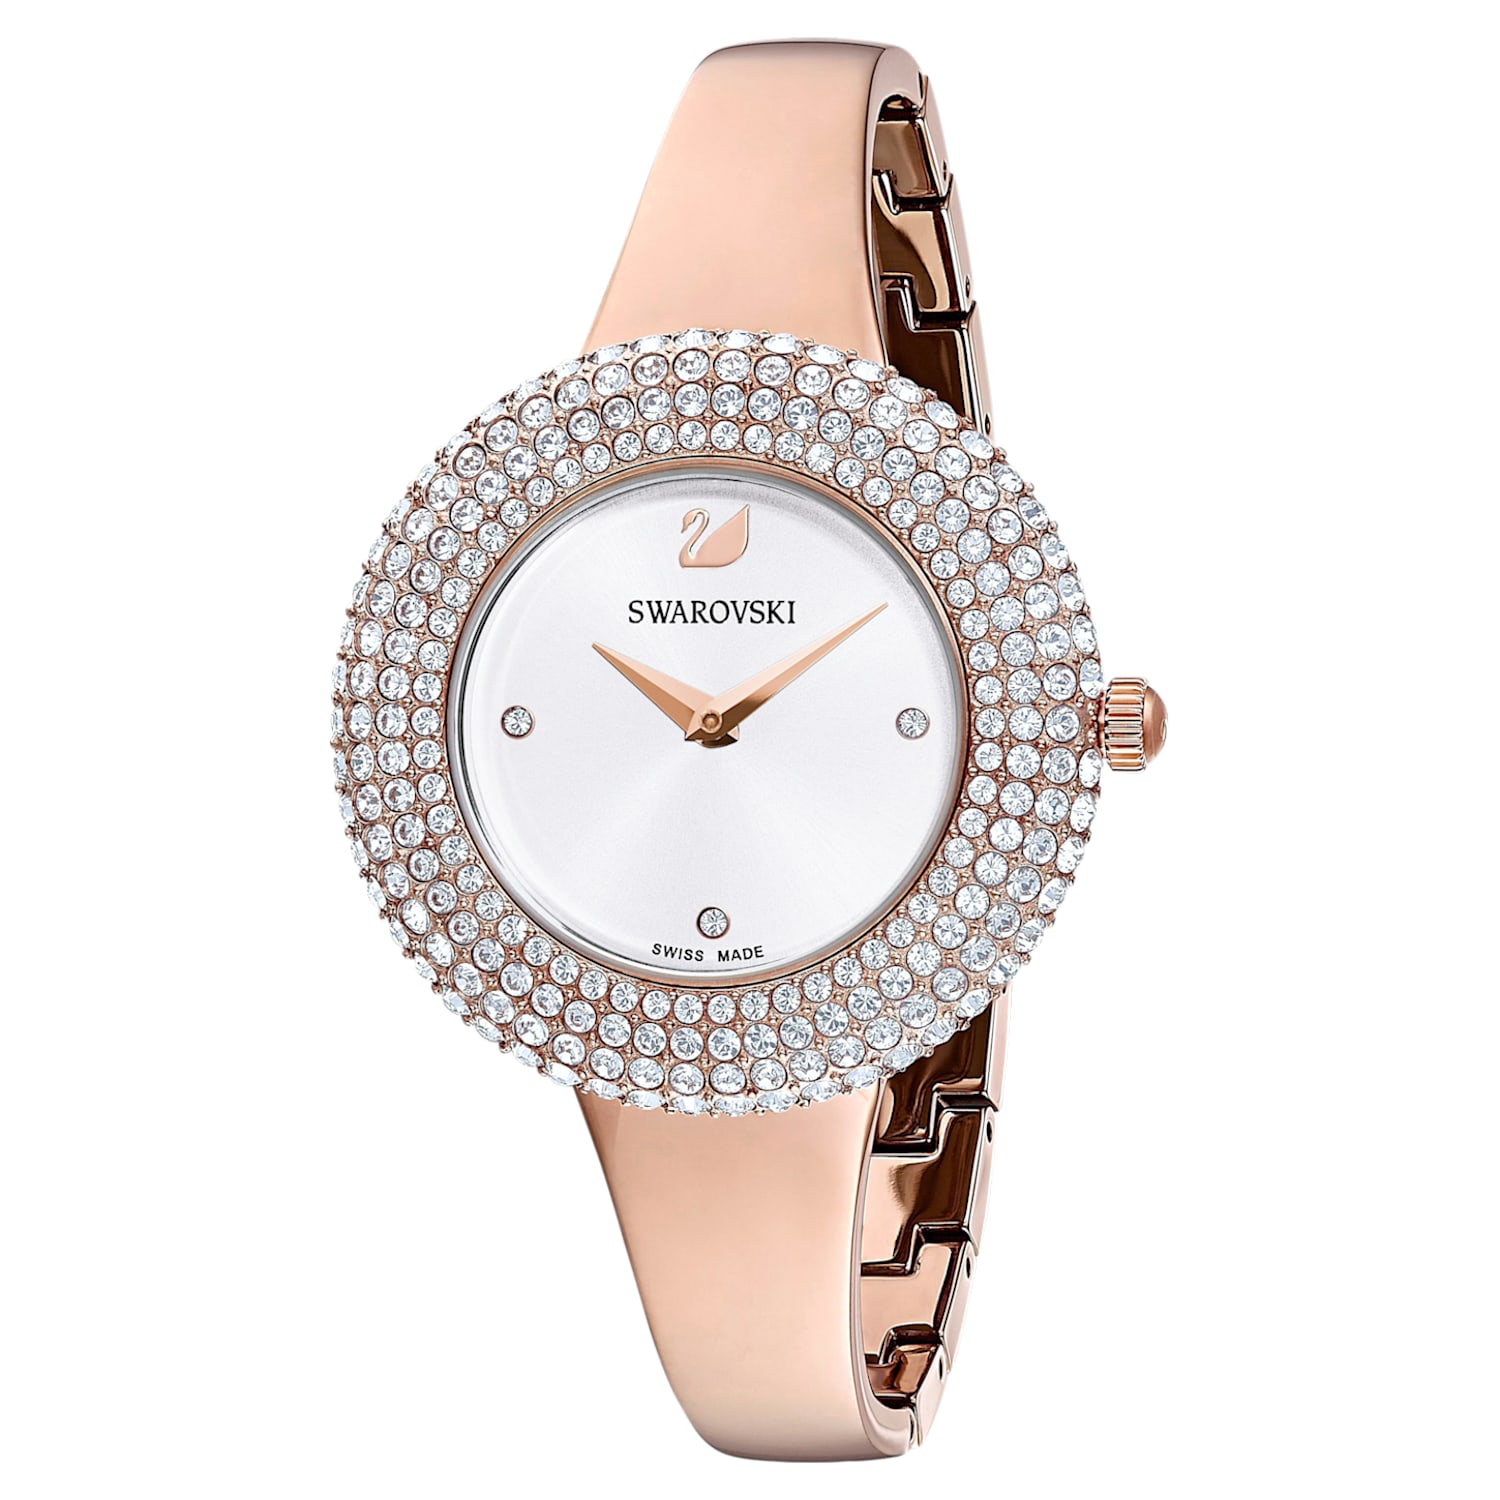 Ophef Verhuizer Controversieel Crystal Rose watch, Swiss Made, Metal bracelet, Rose gold tone, Rose  gold-tone finish